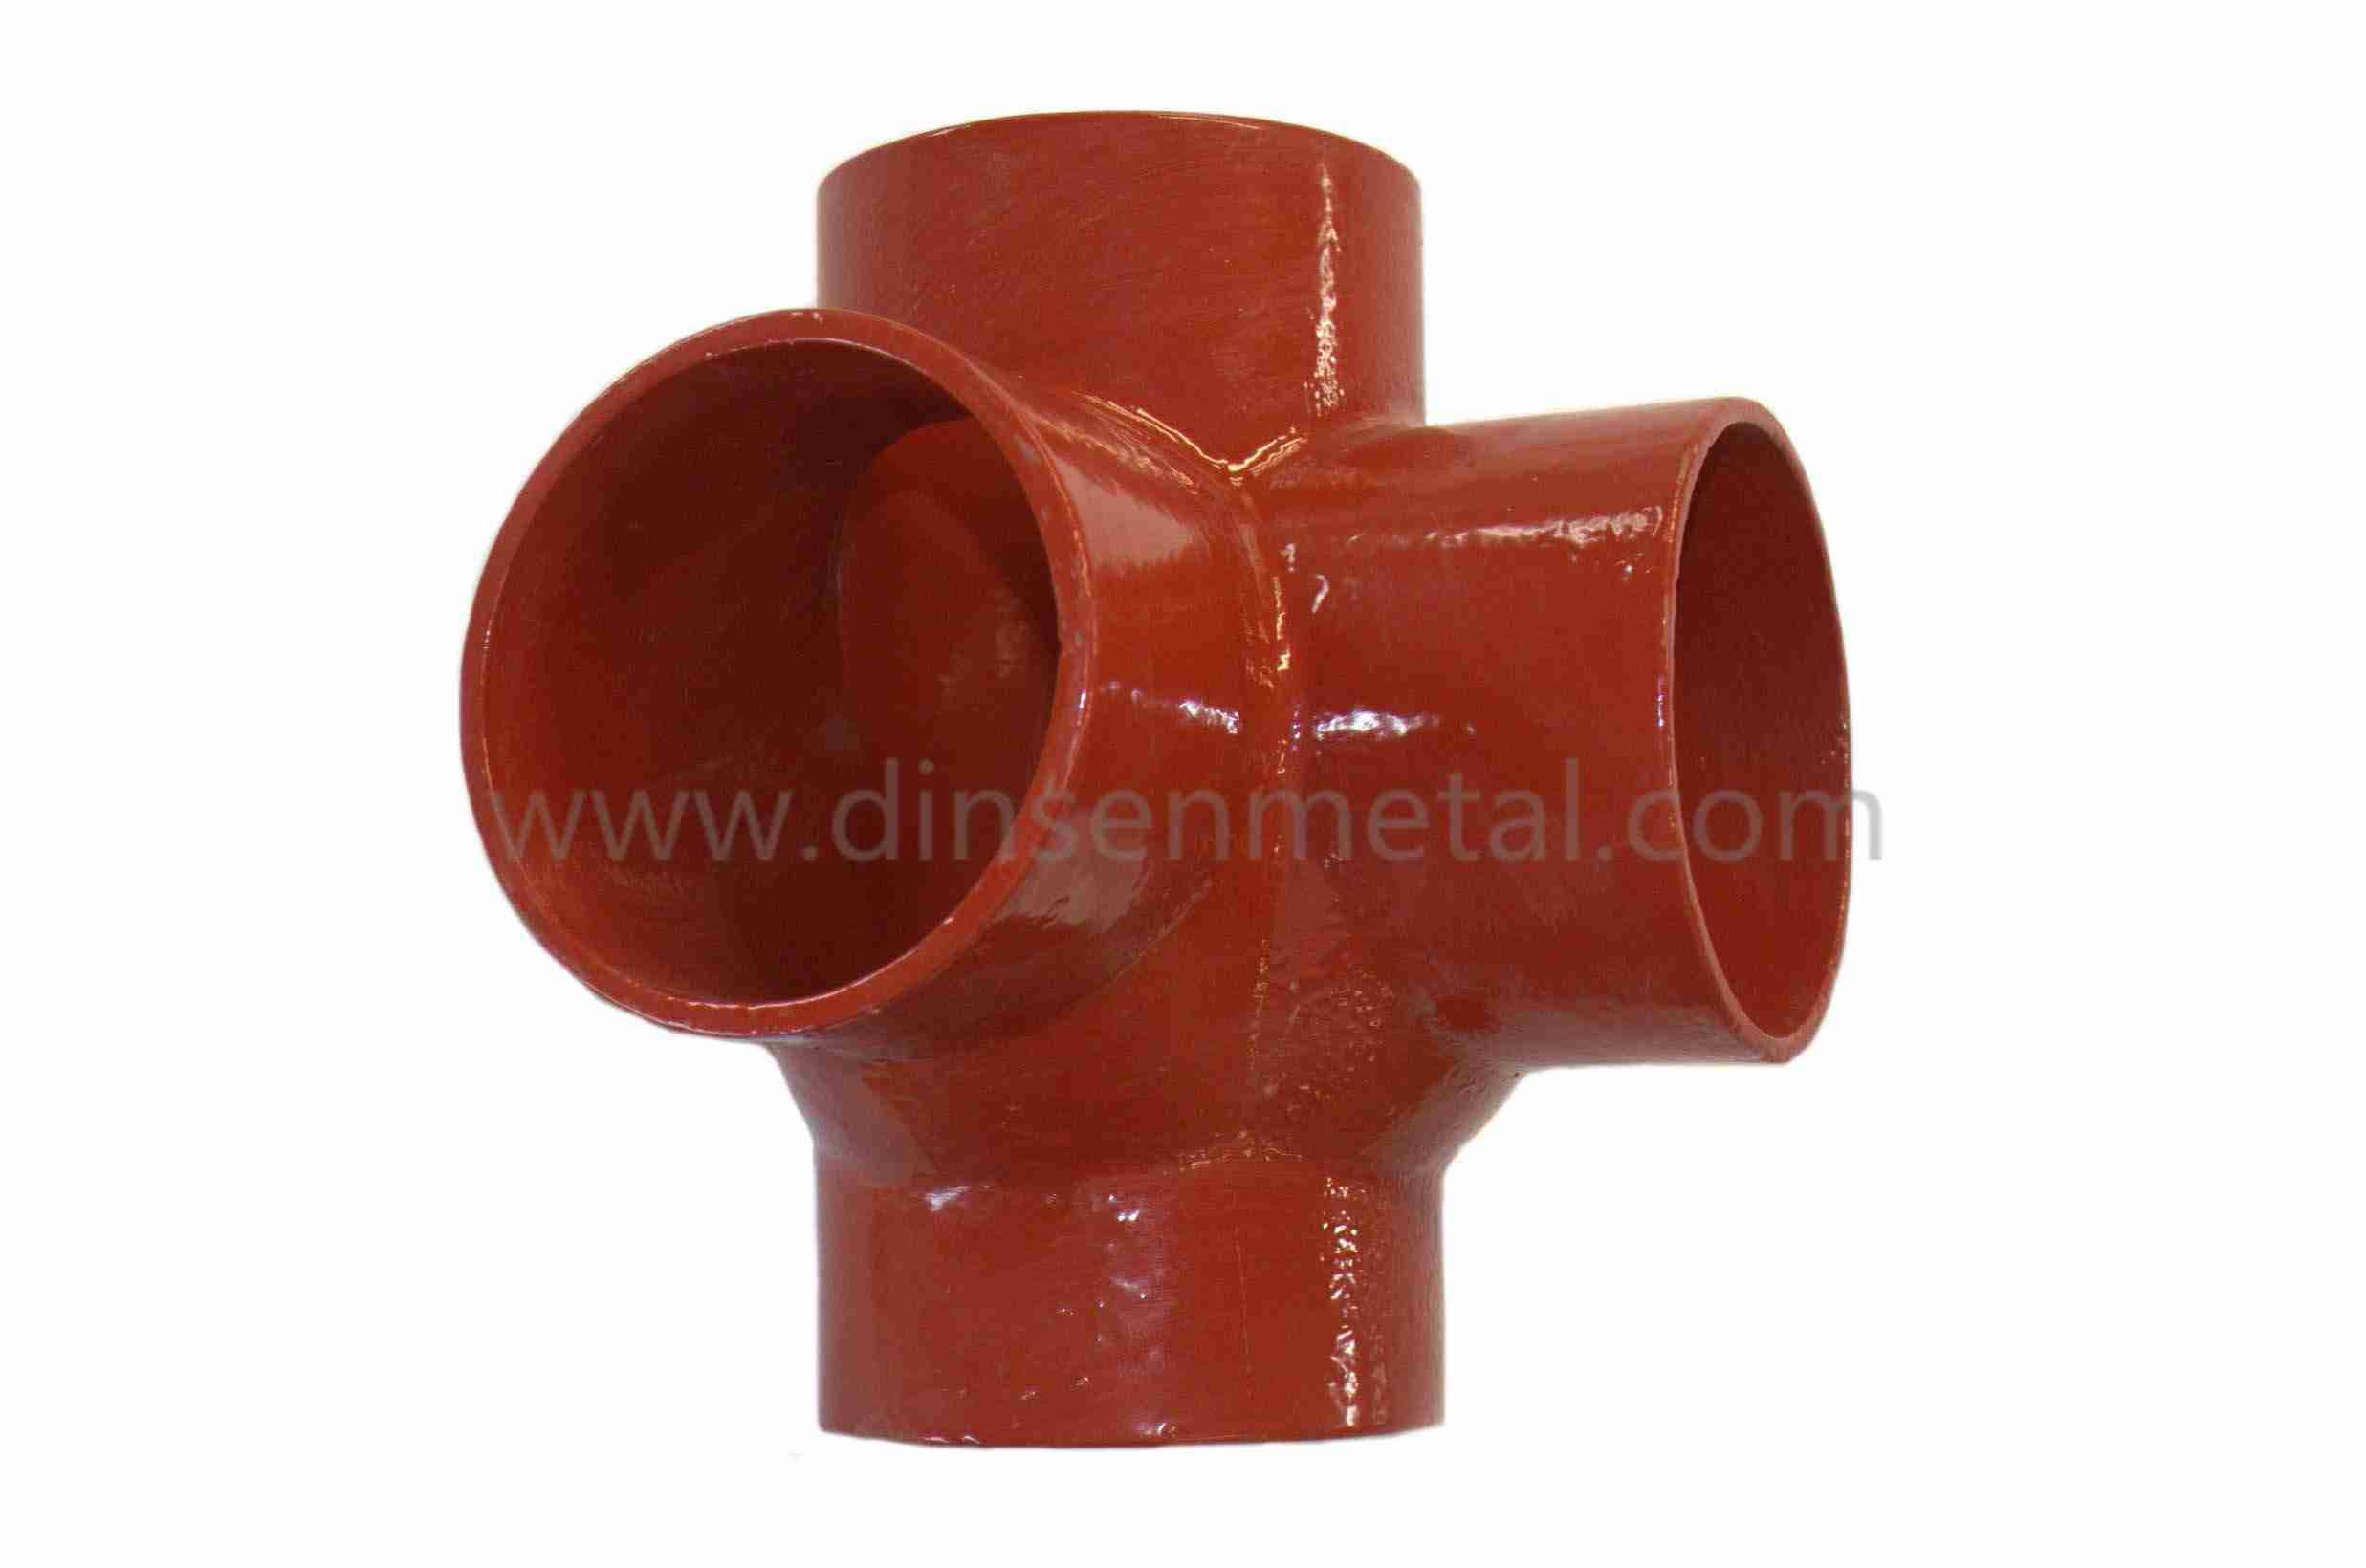 China factory EN877 SML cast iron drainage pipe and fitting